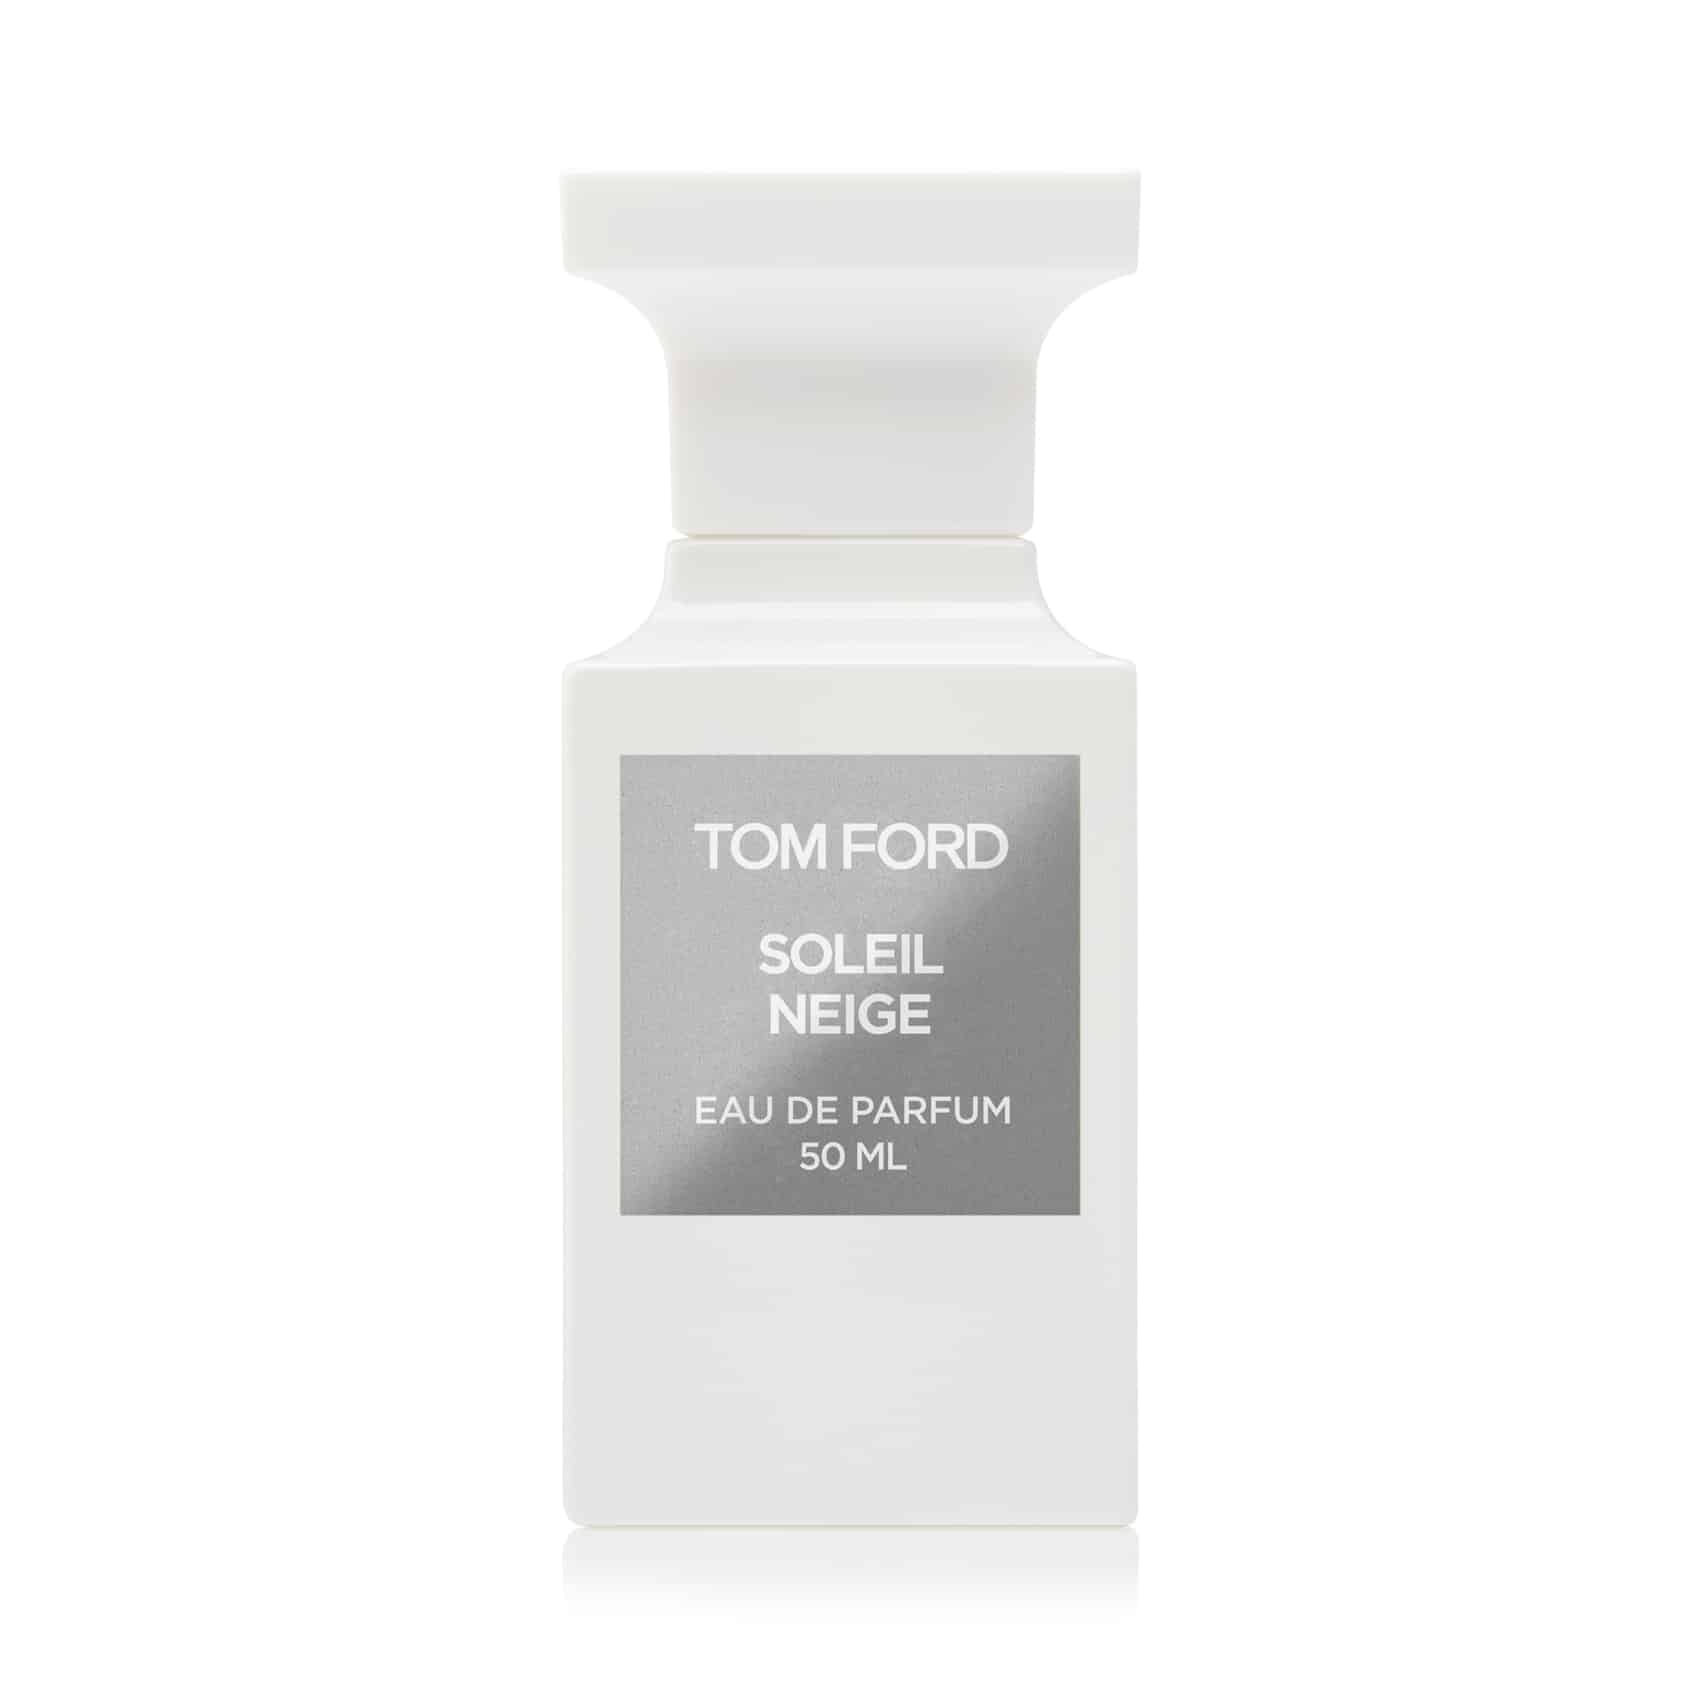 Tom Ford's Shimmering Body Oil is the Blake Lively of